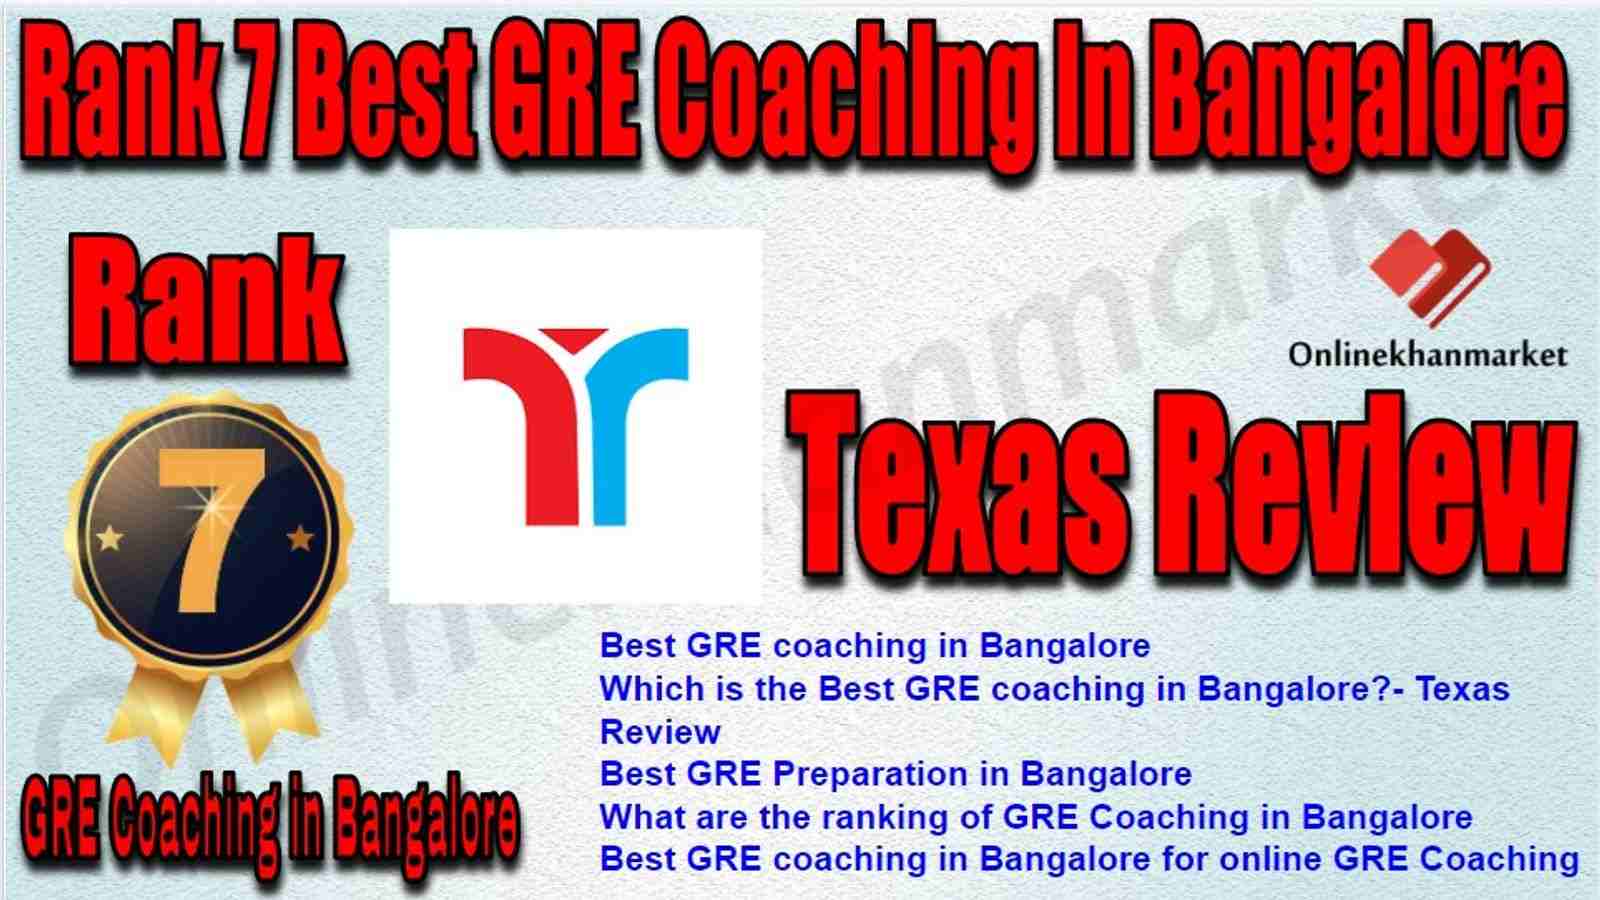 Rank 7 Best GRE Coaching in Bangalore